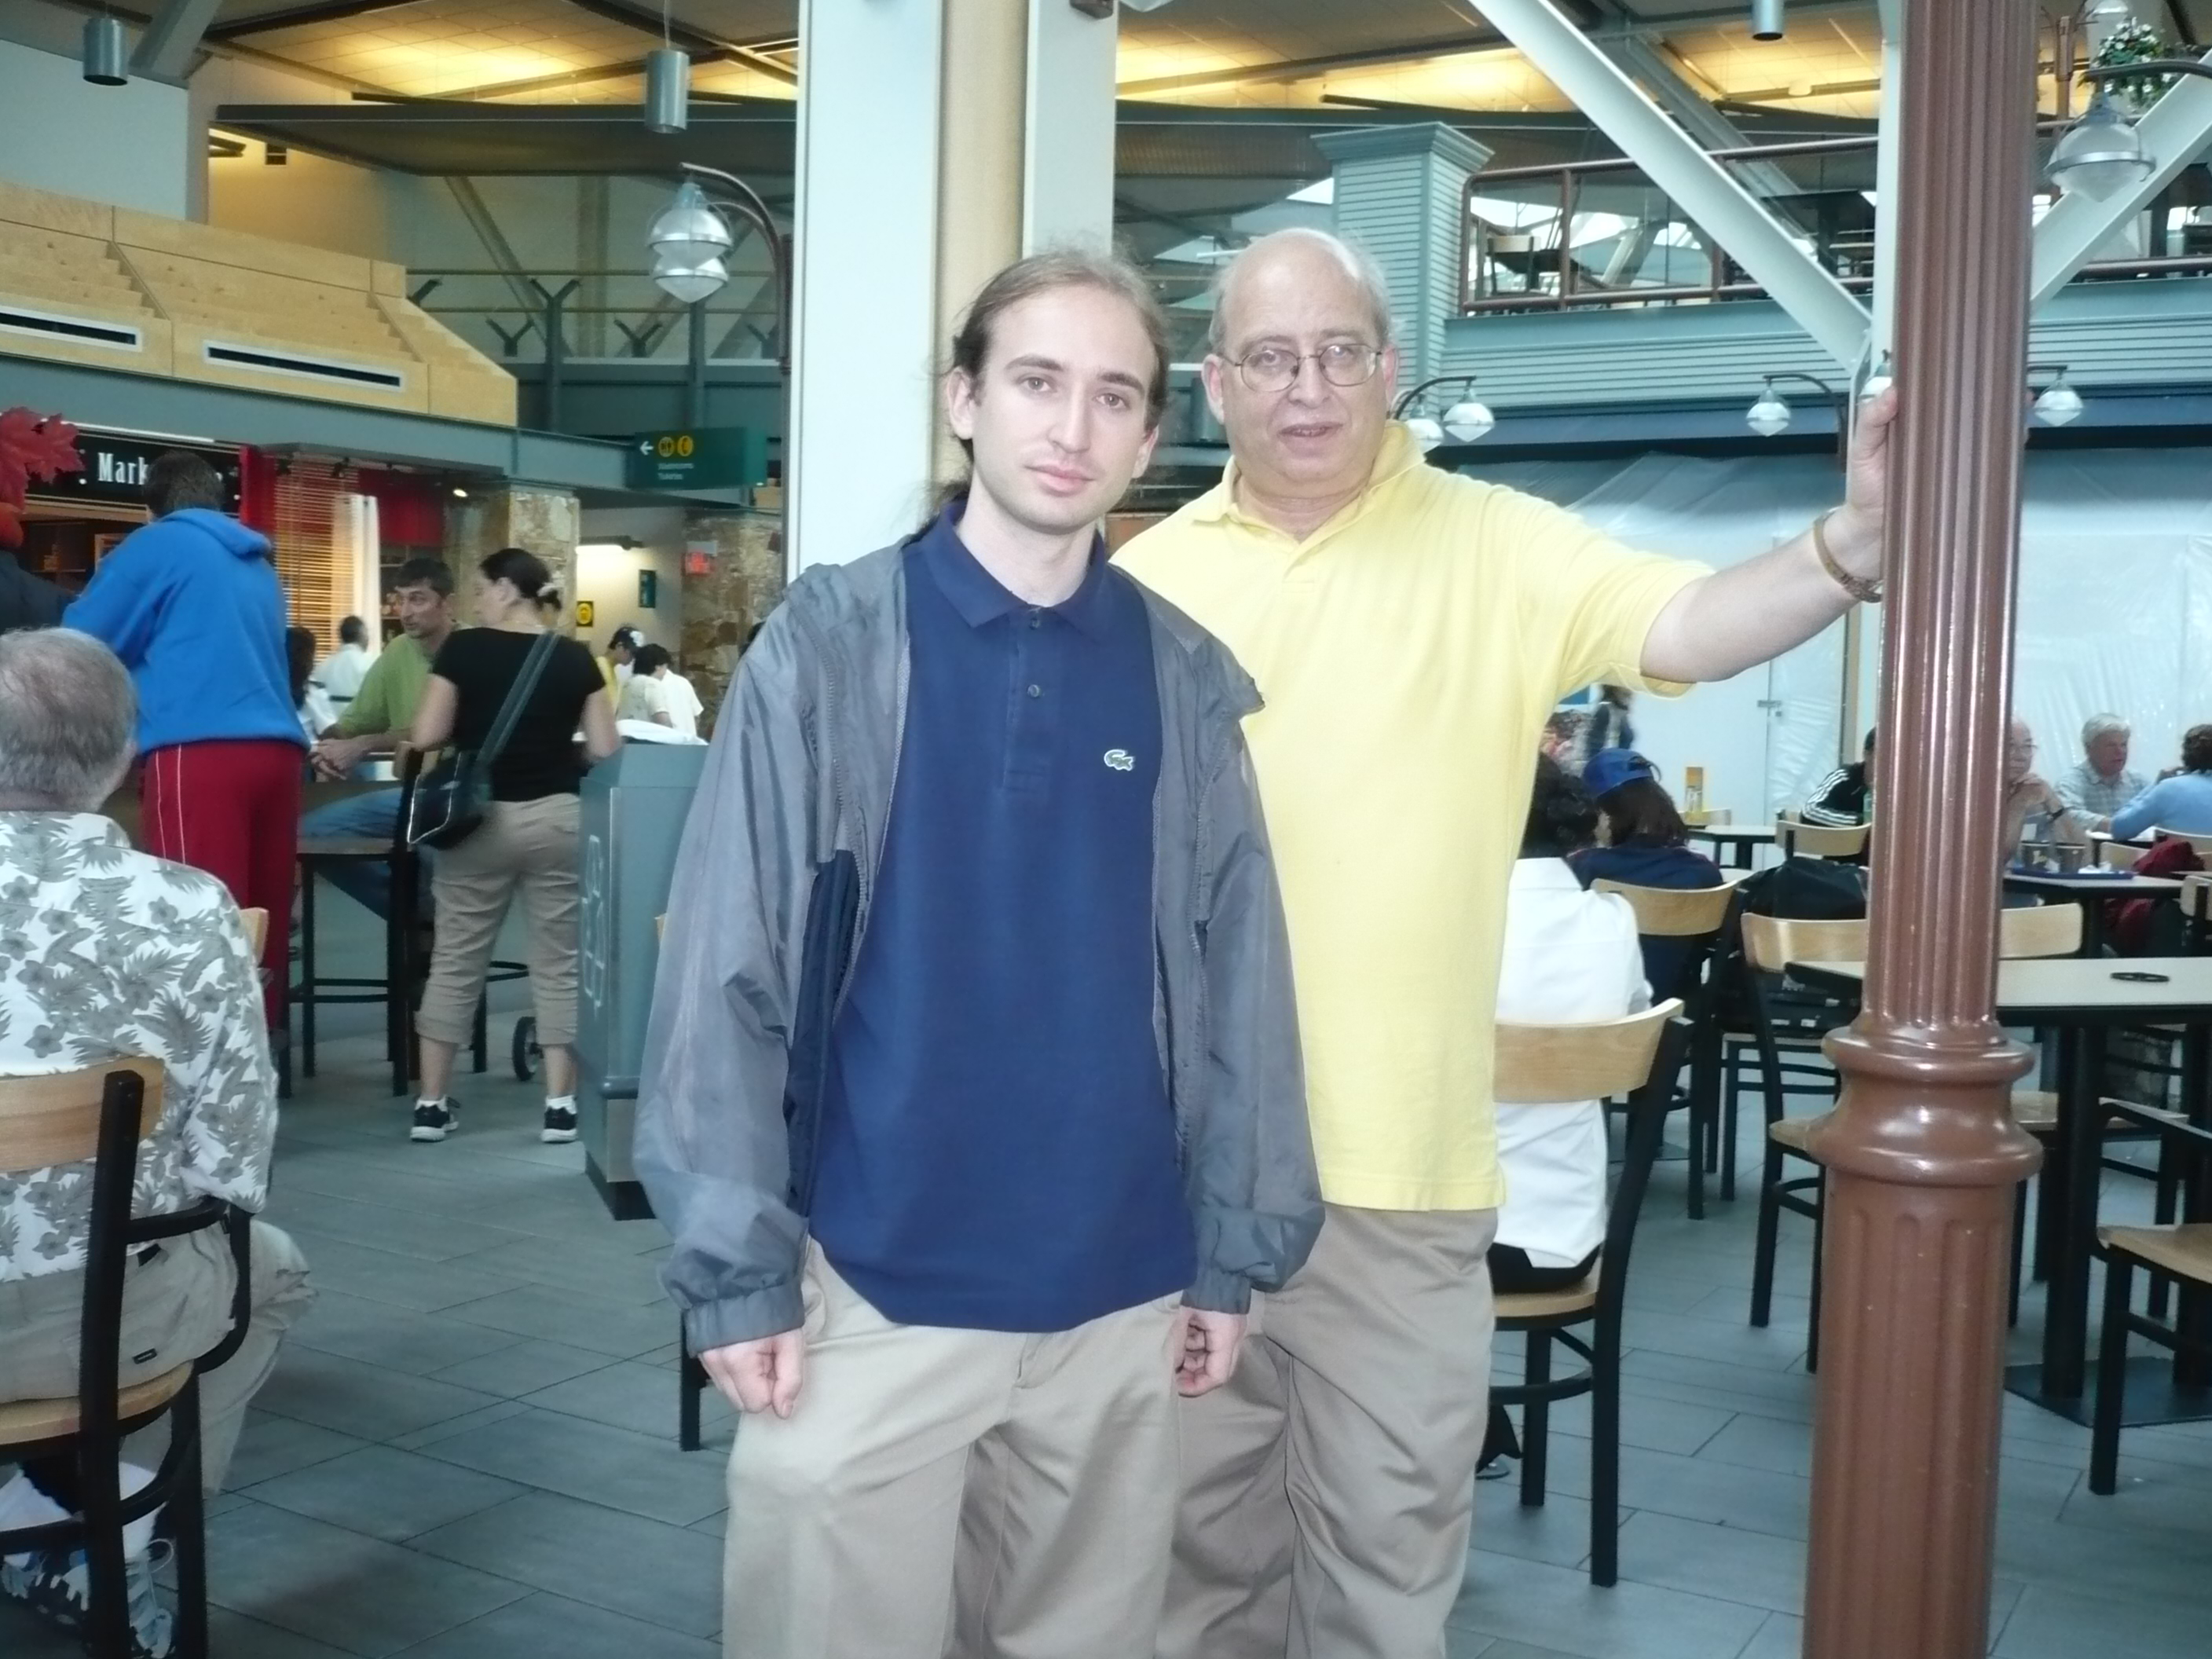 Photo with older son, at YVR